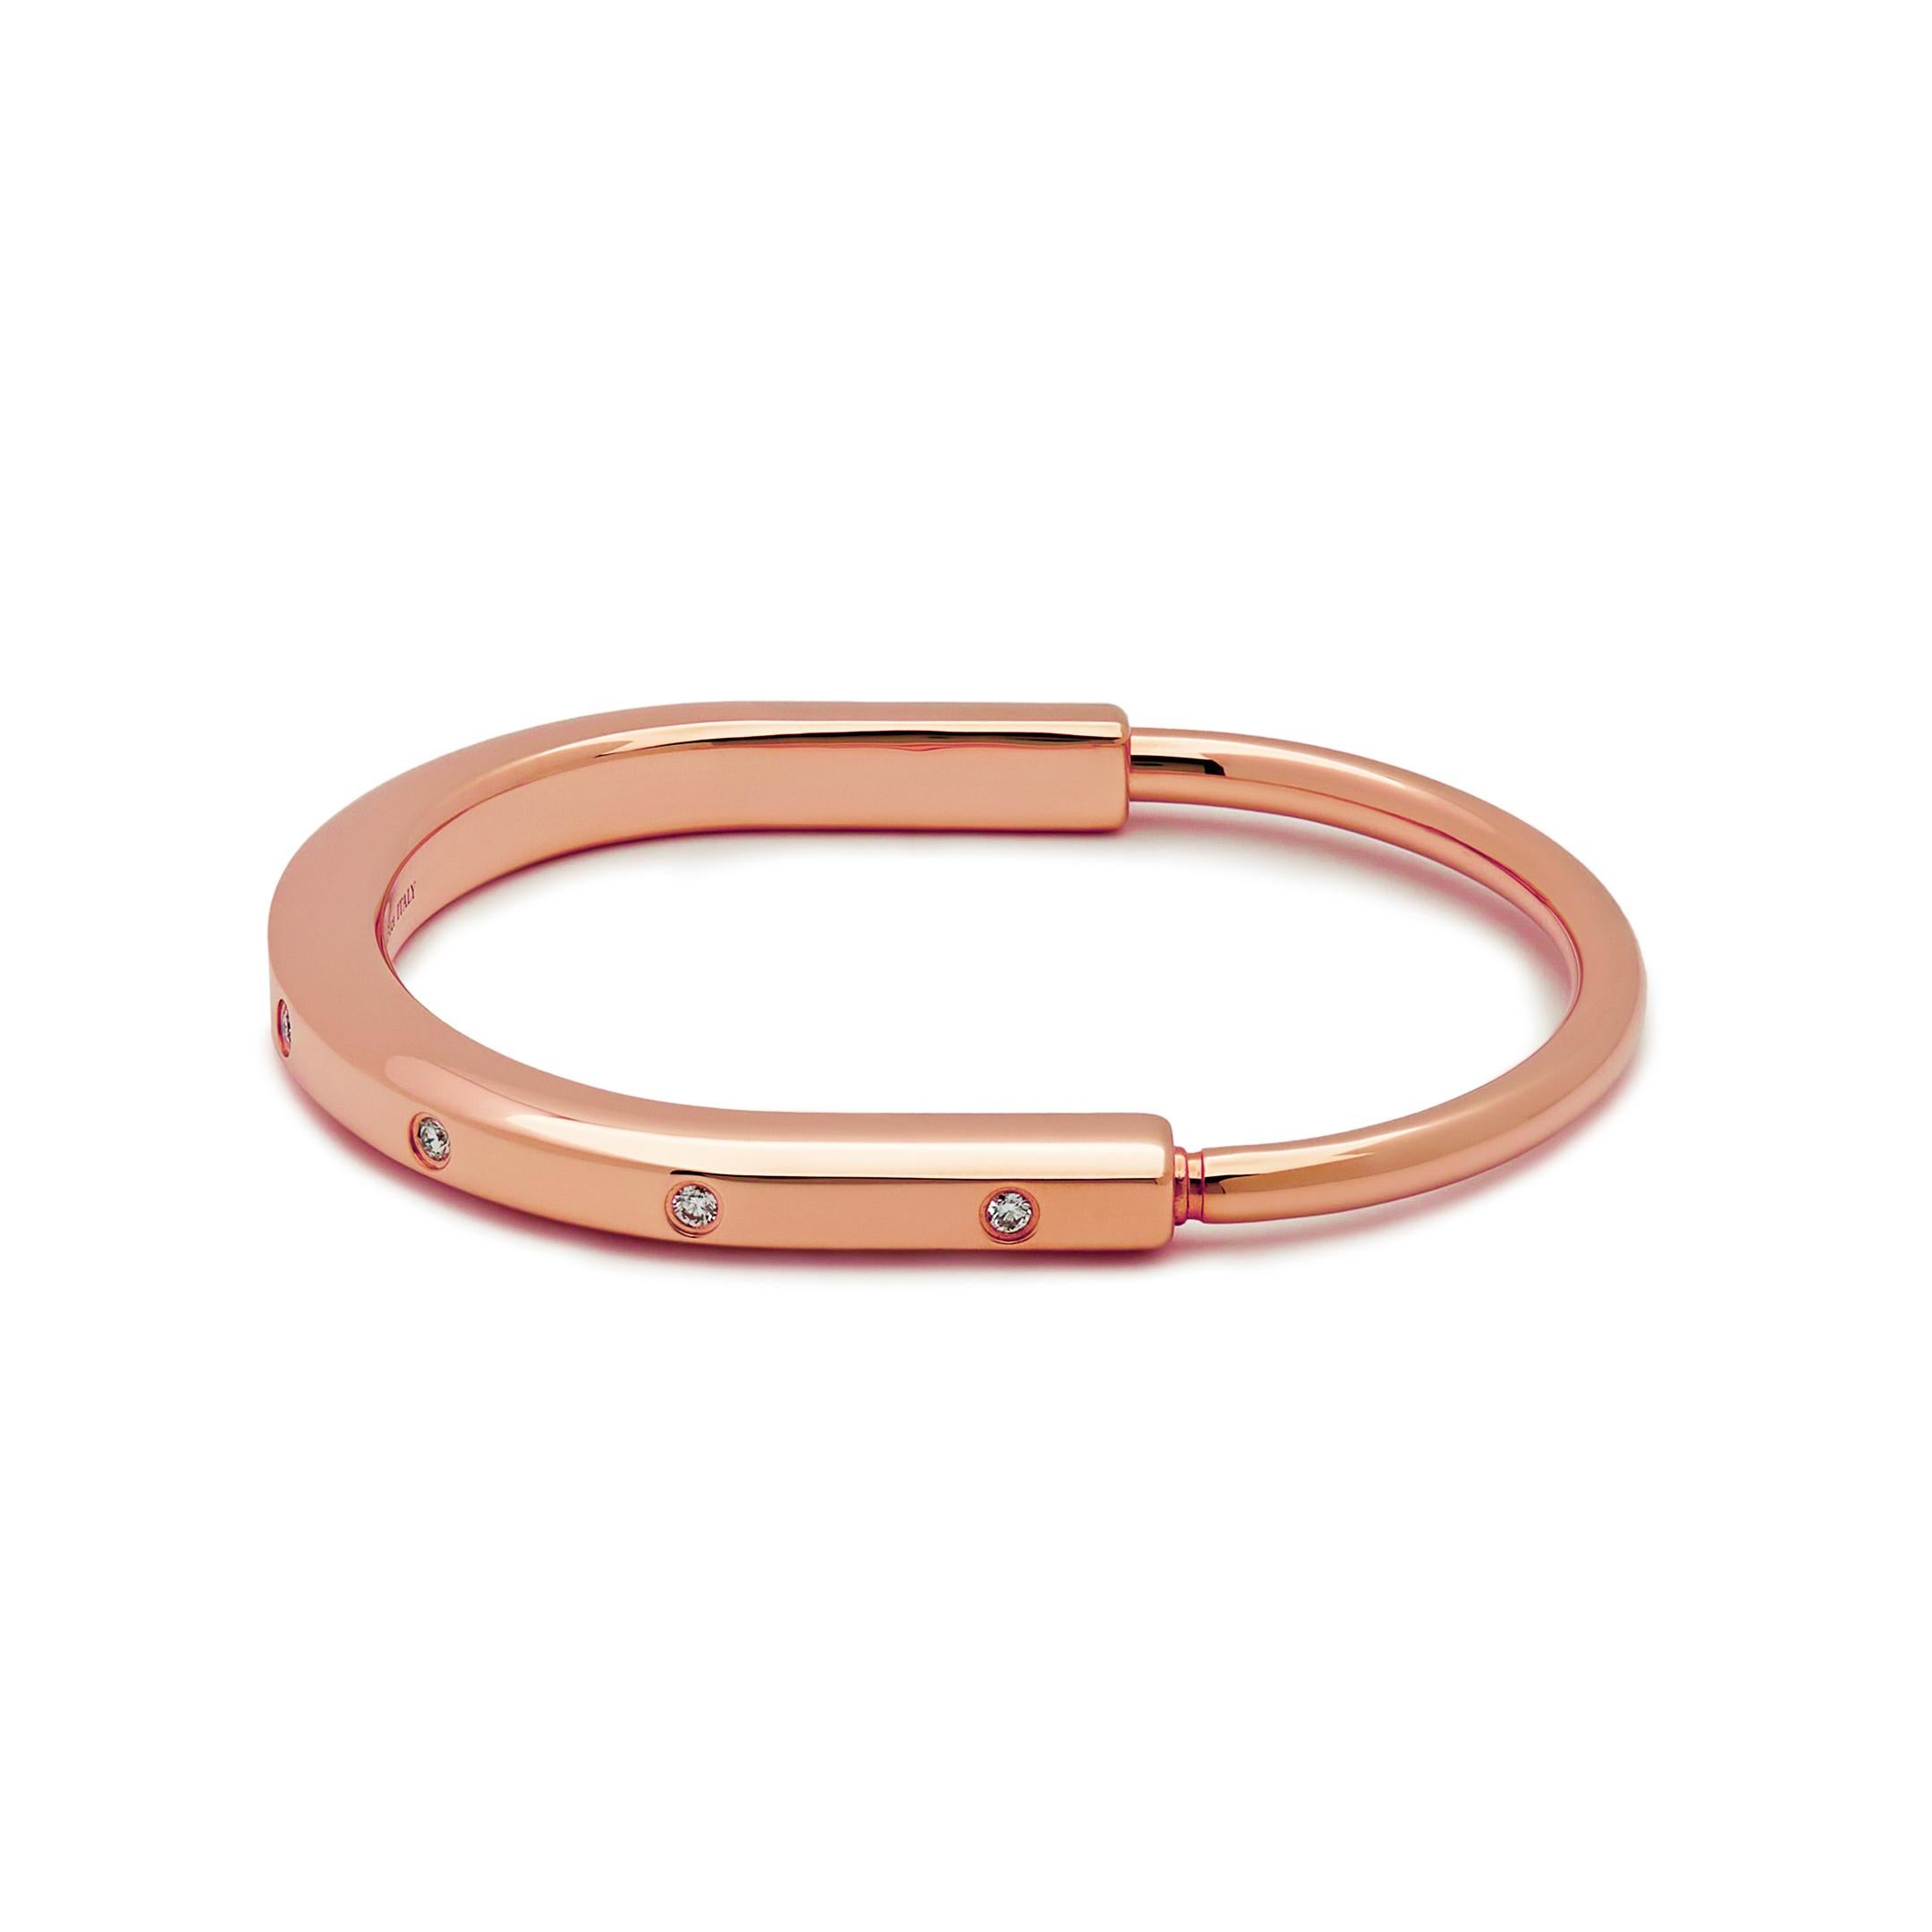 Tiffany & Co. Lock Bangle in Rose Gold with Diamond Accents 70185296 For Sale